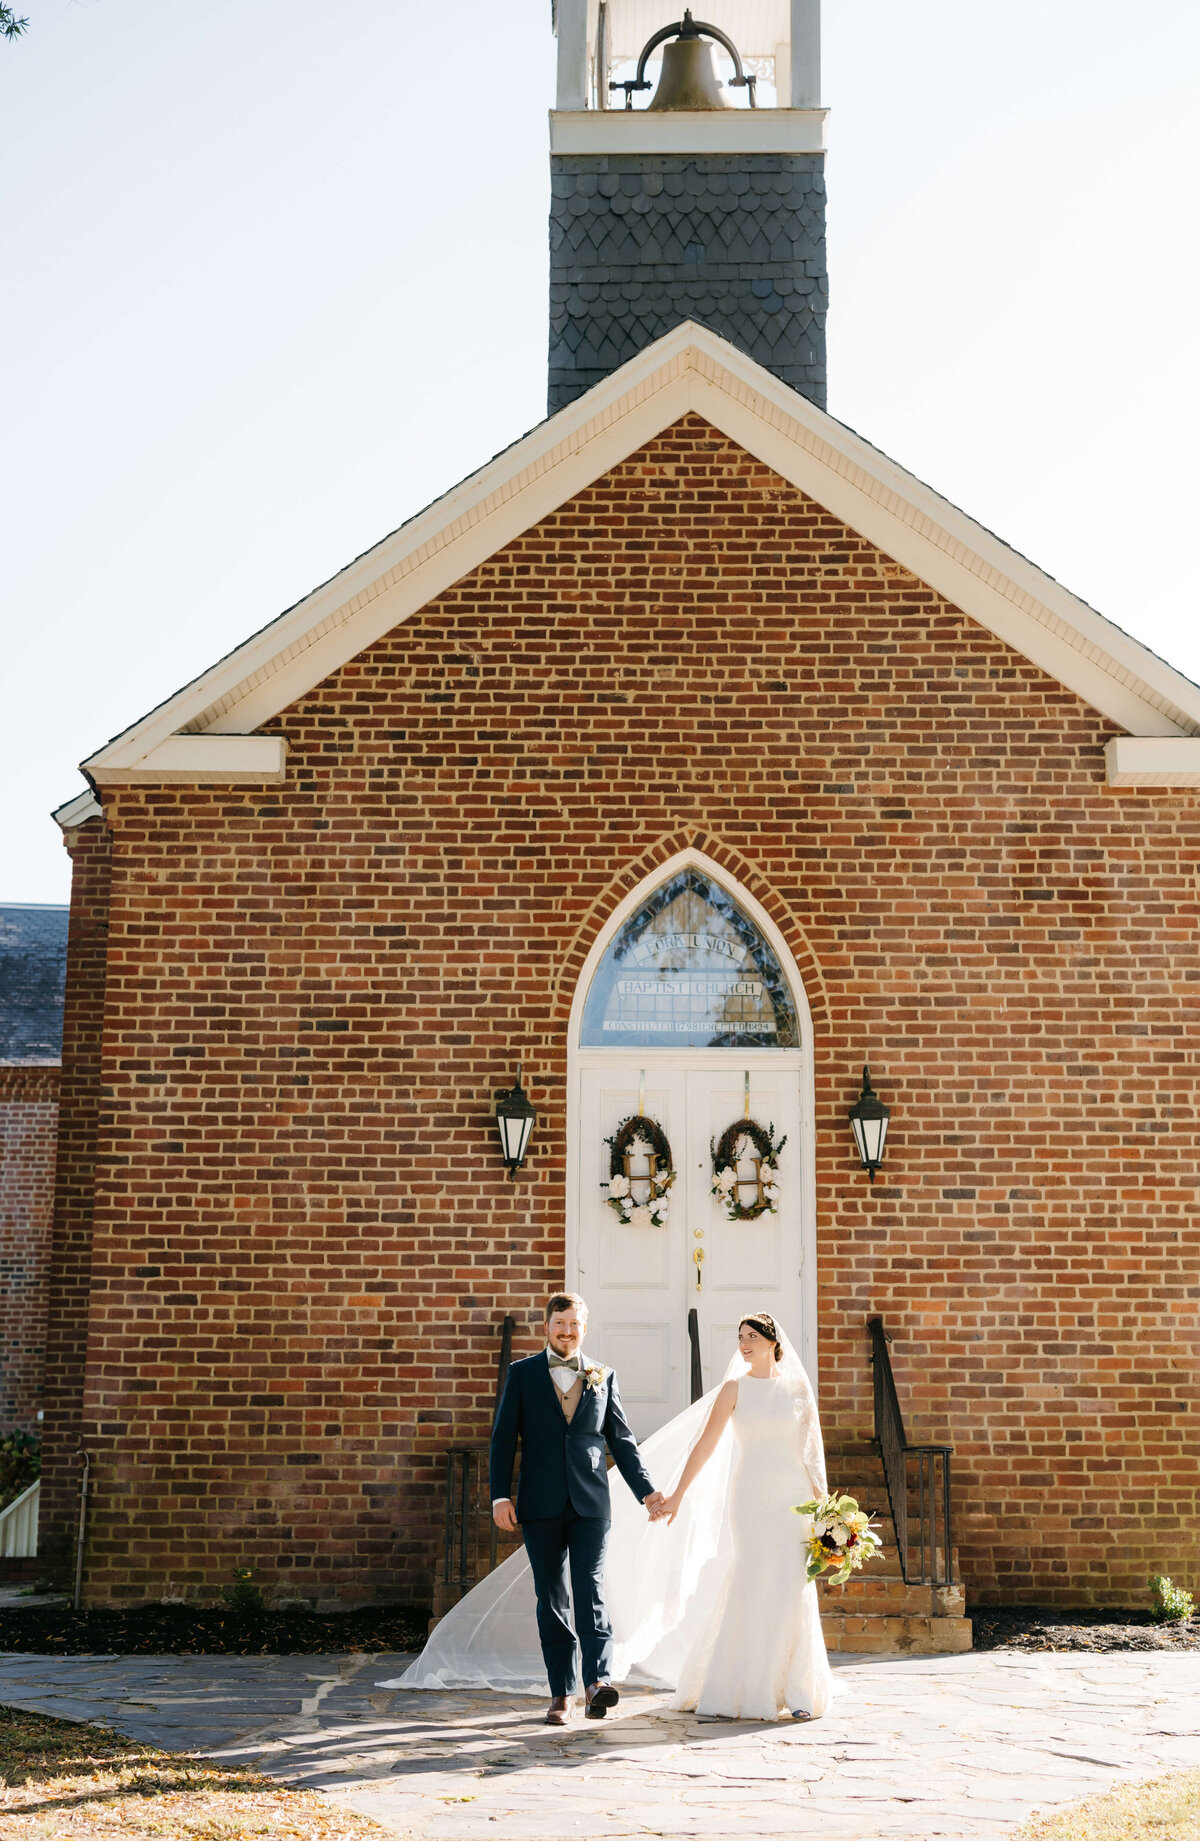 richmond wedding photographer captures bride and groom holding hands as they walk in front of a brick wedding chapel with tall white doors